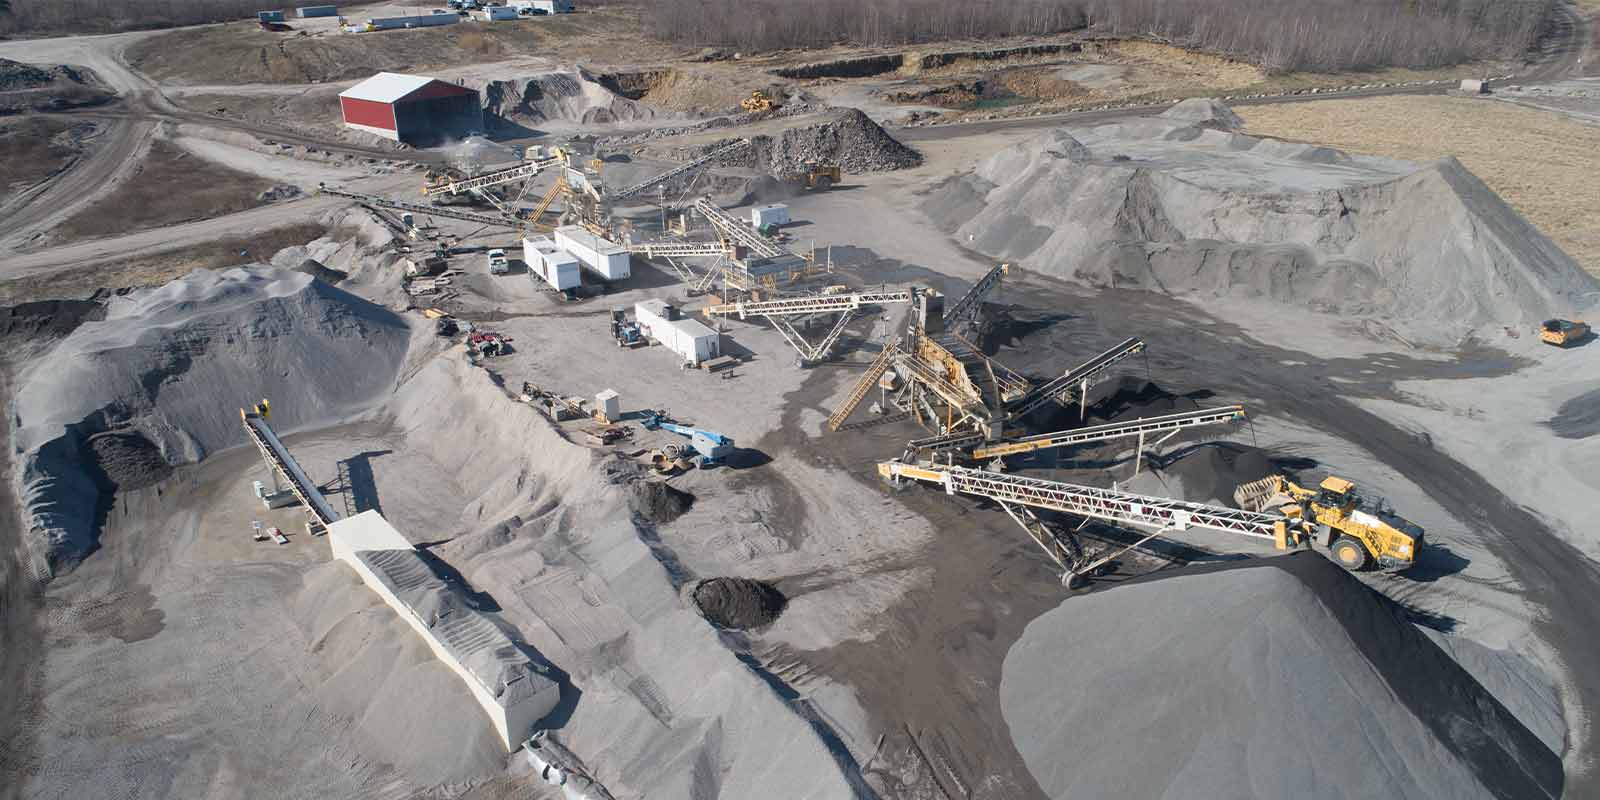 aerial view of a rock crushing site